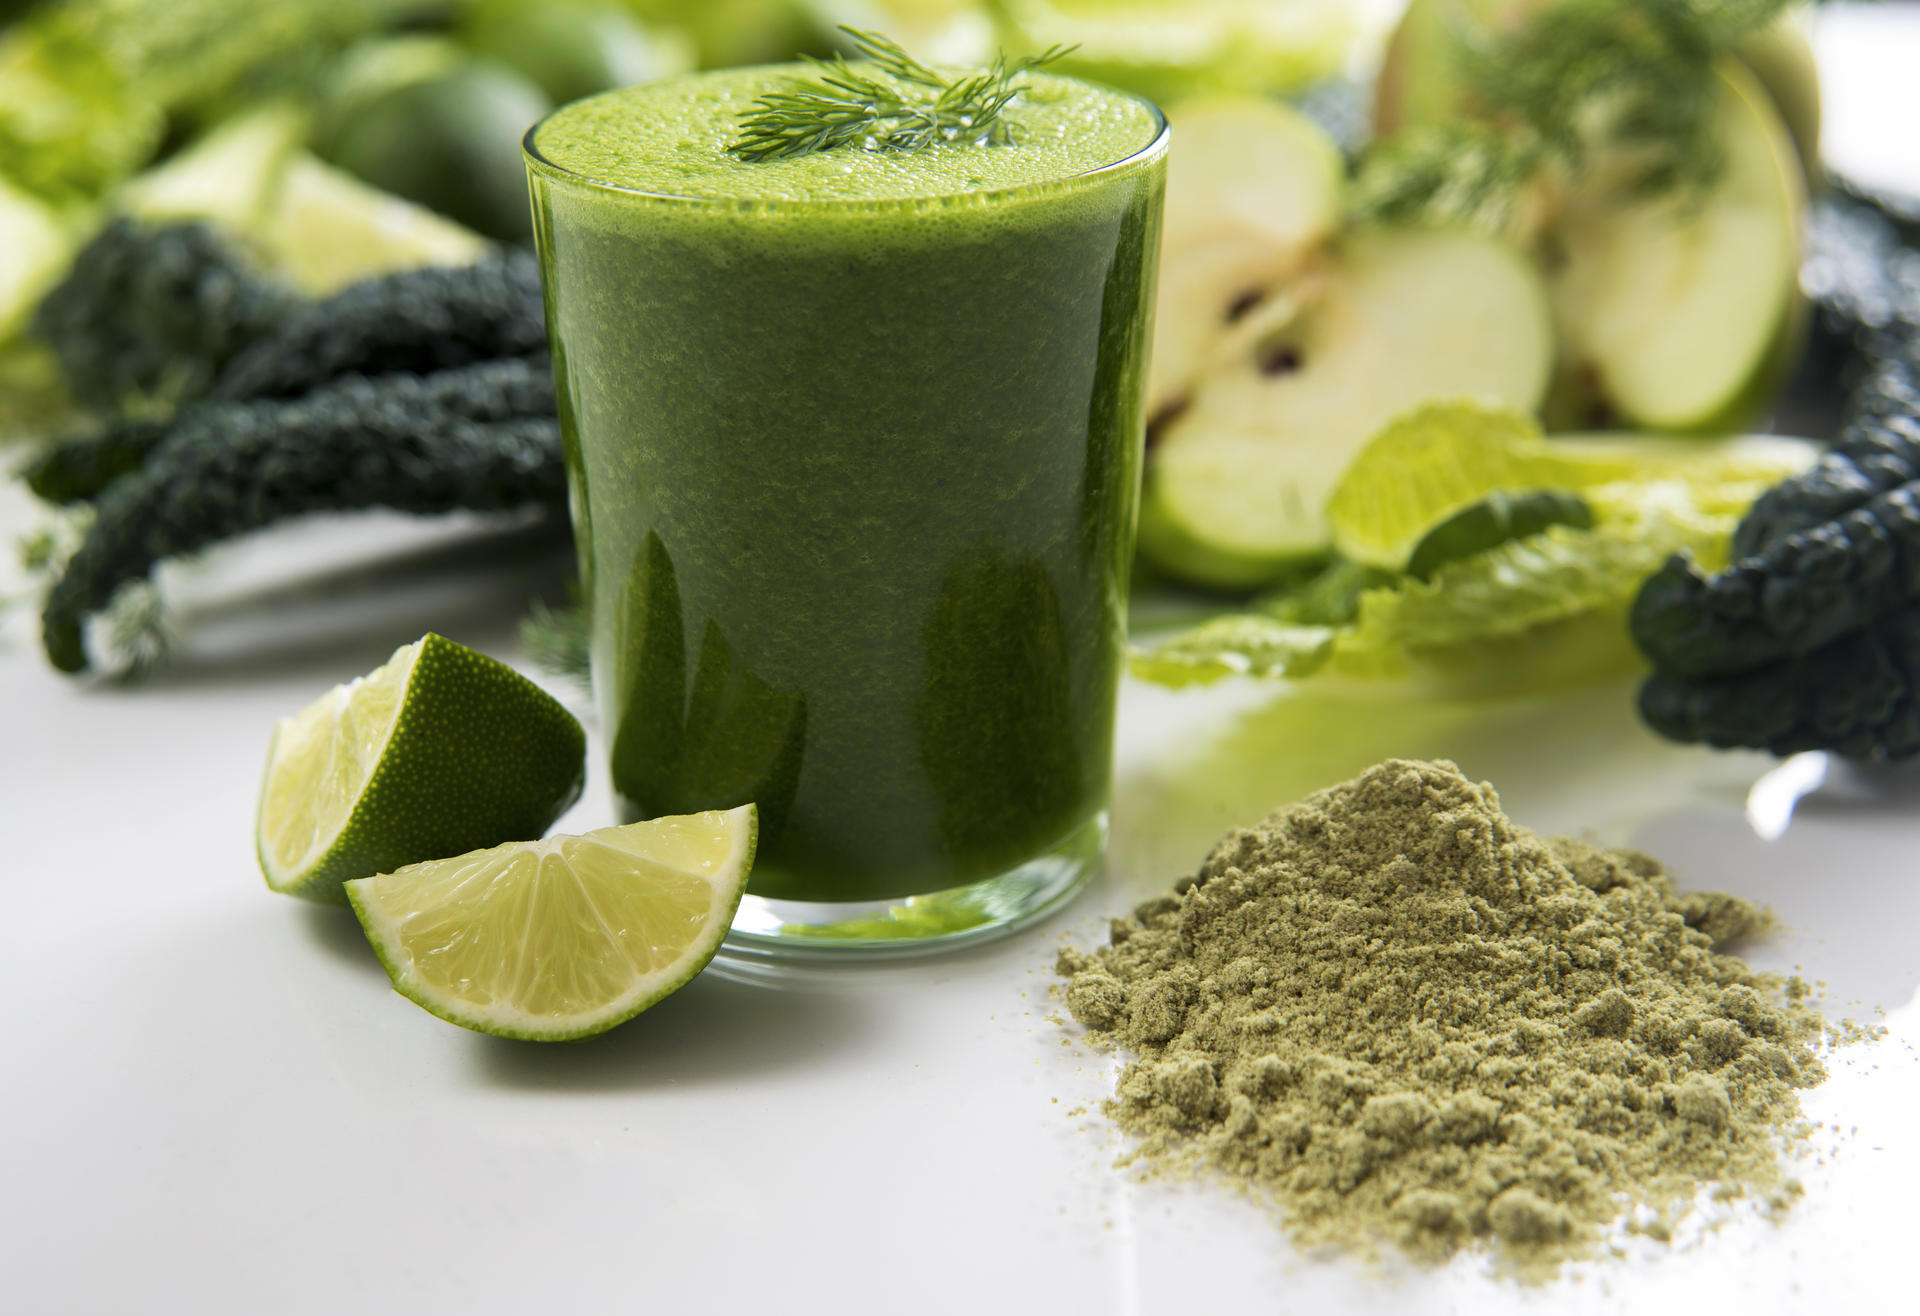 A smoothie made from organic greens, fruits and spirulina powder will kick-start your body's metabolism.